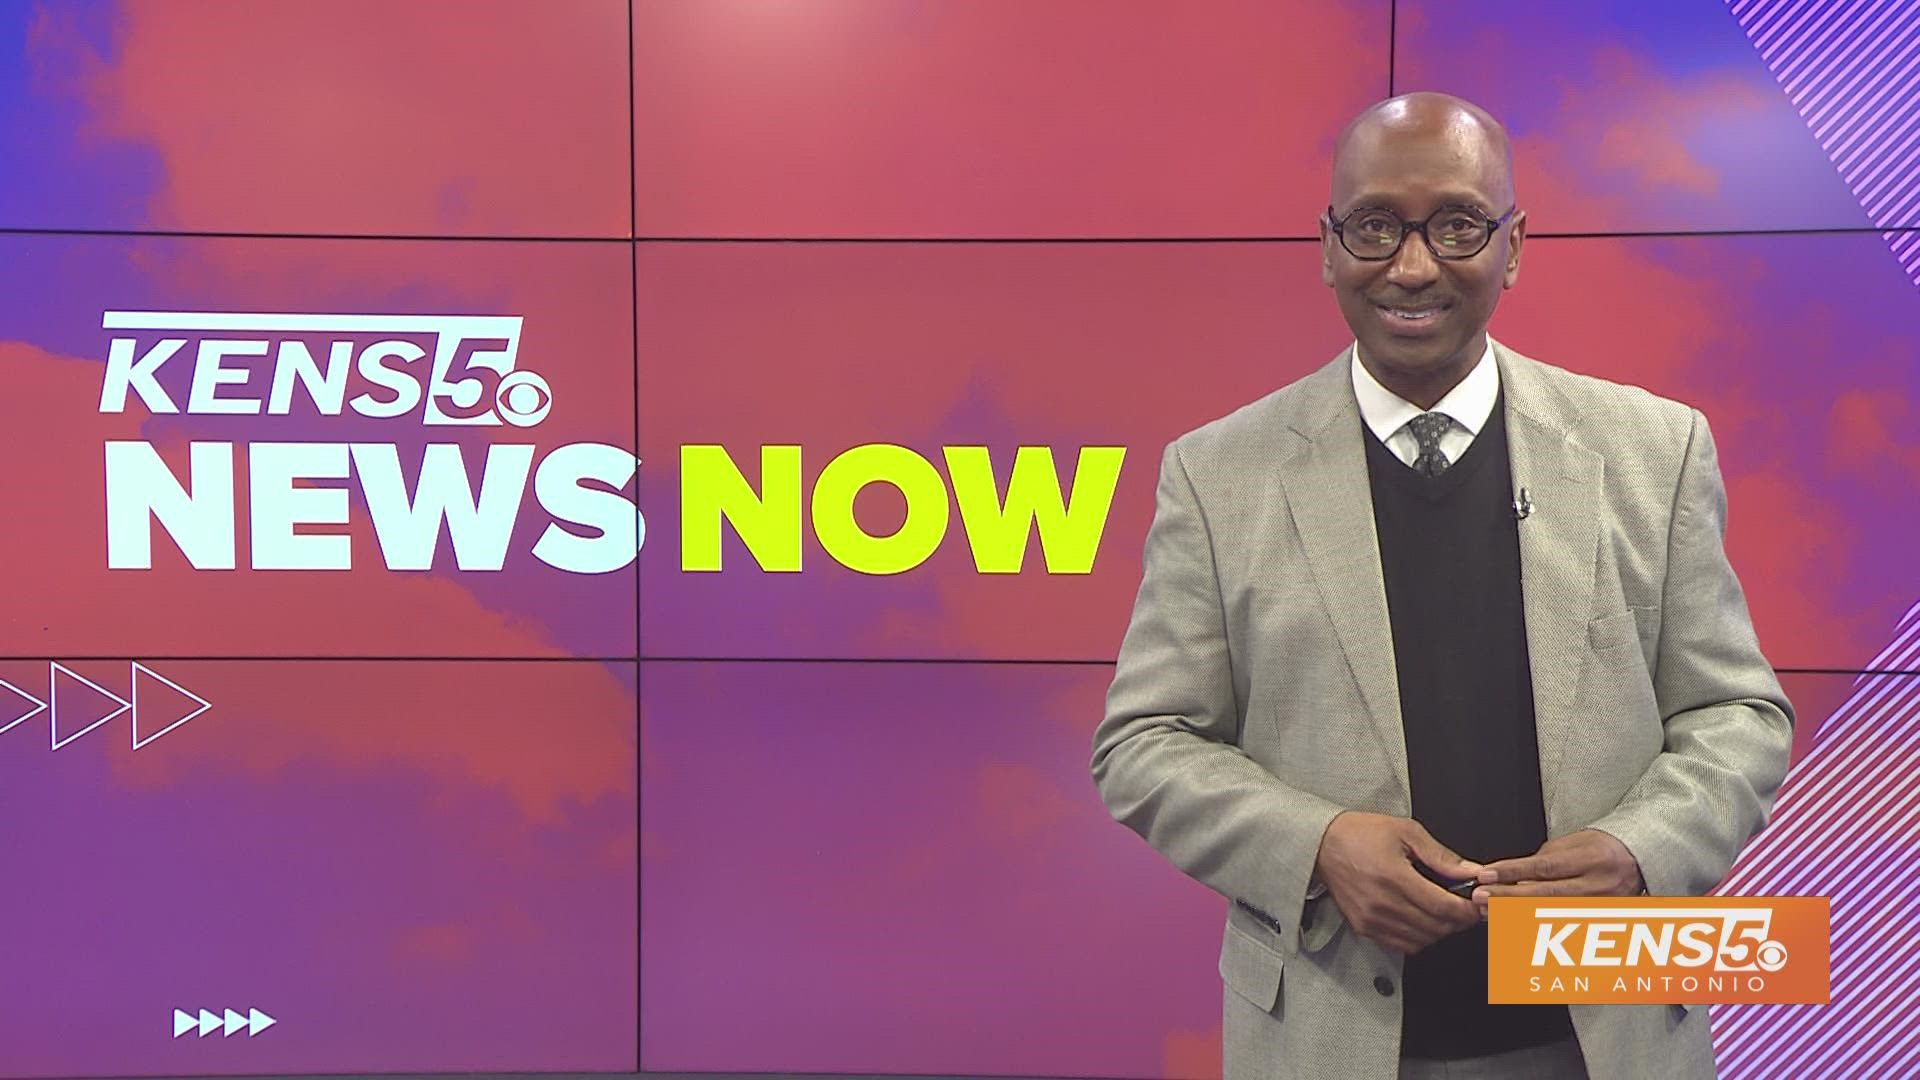 Follow us here to get the latest top headlines with the KENS 5 morning team every weekday.